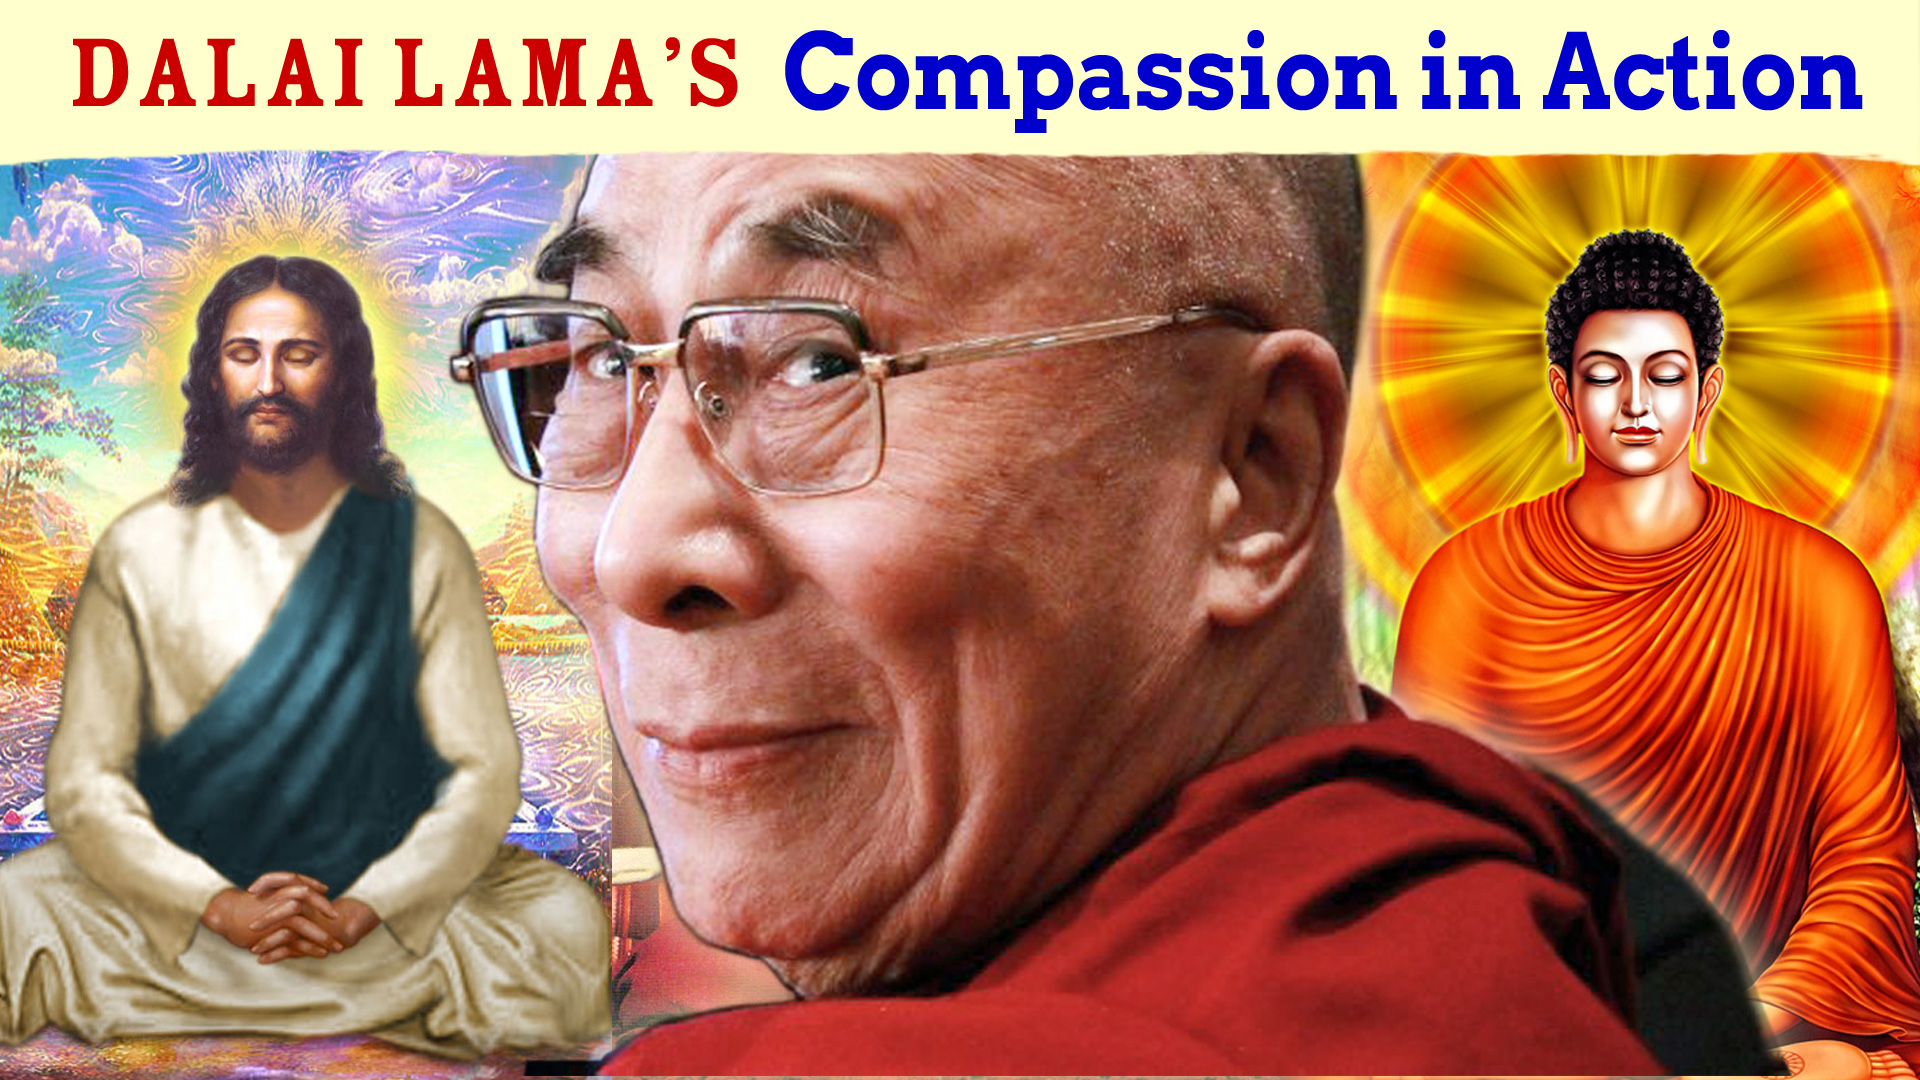 cia-trailer-image-v2-1-jesus-hhdl-buddha-top-text-only-1920x1080